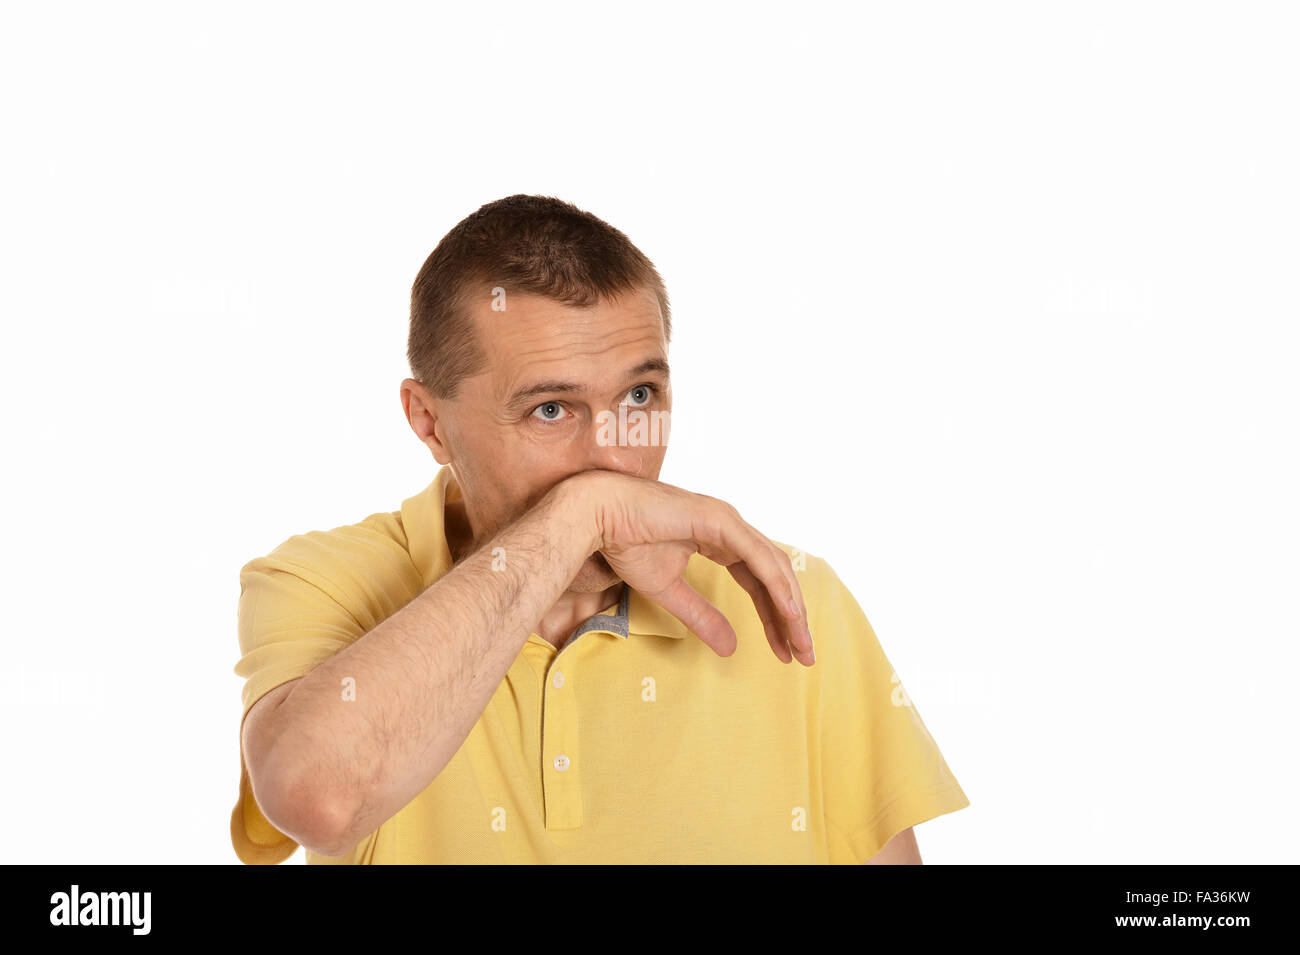 Man wiping snot by his hand Stock Photo